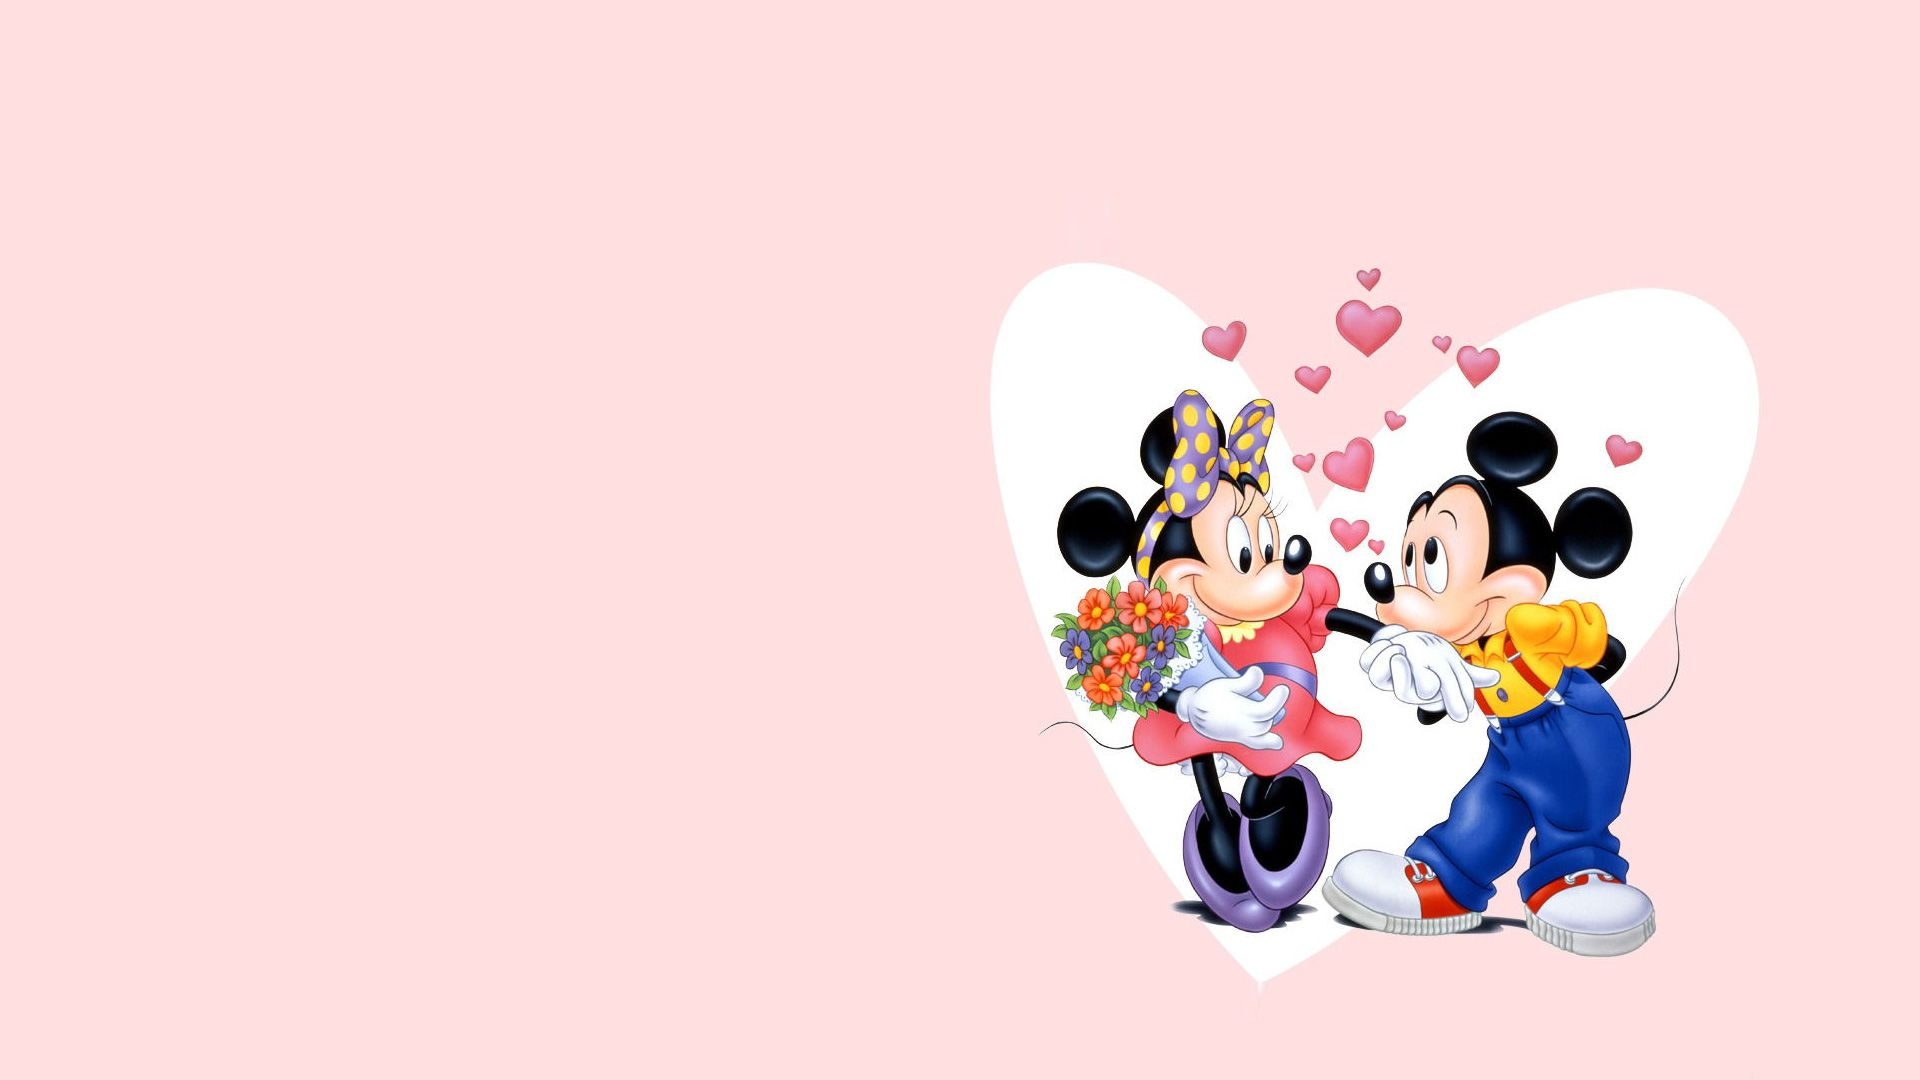 Minnie Mouse, Minnie wallpapers, High definition, Vibrant colors, 1920x1080 Full HD Desktop